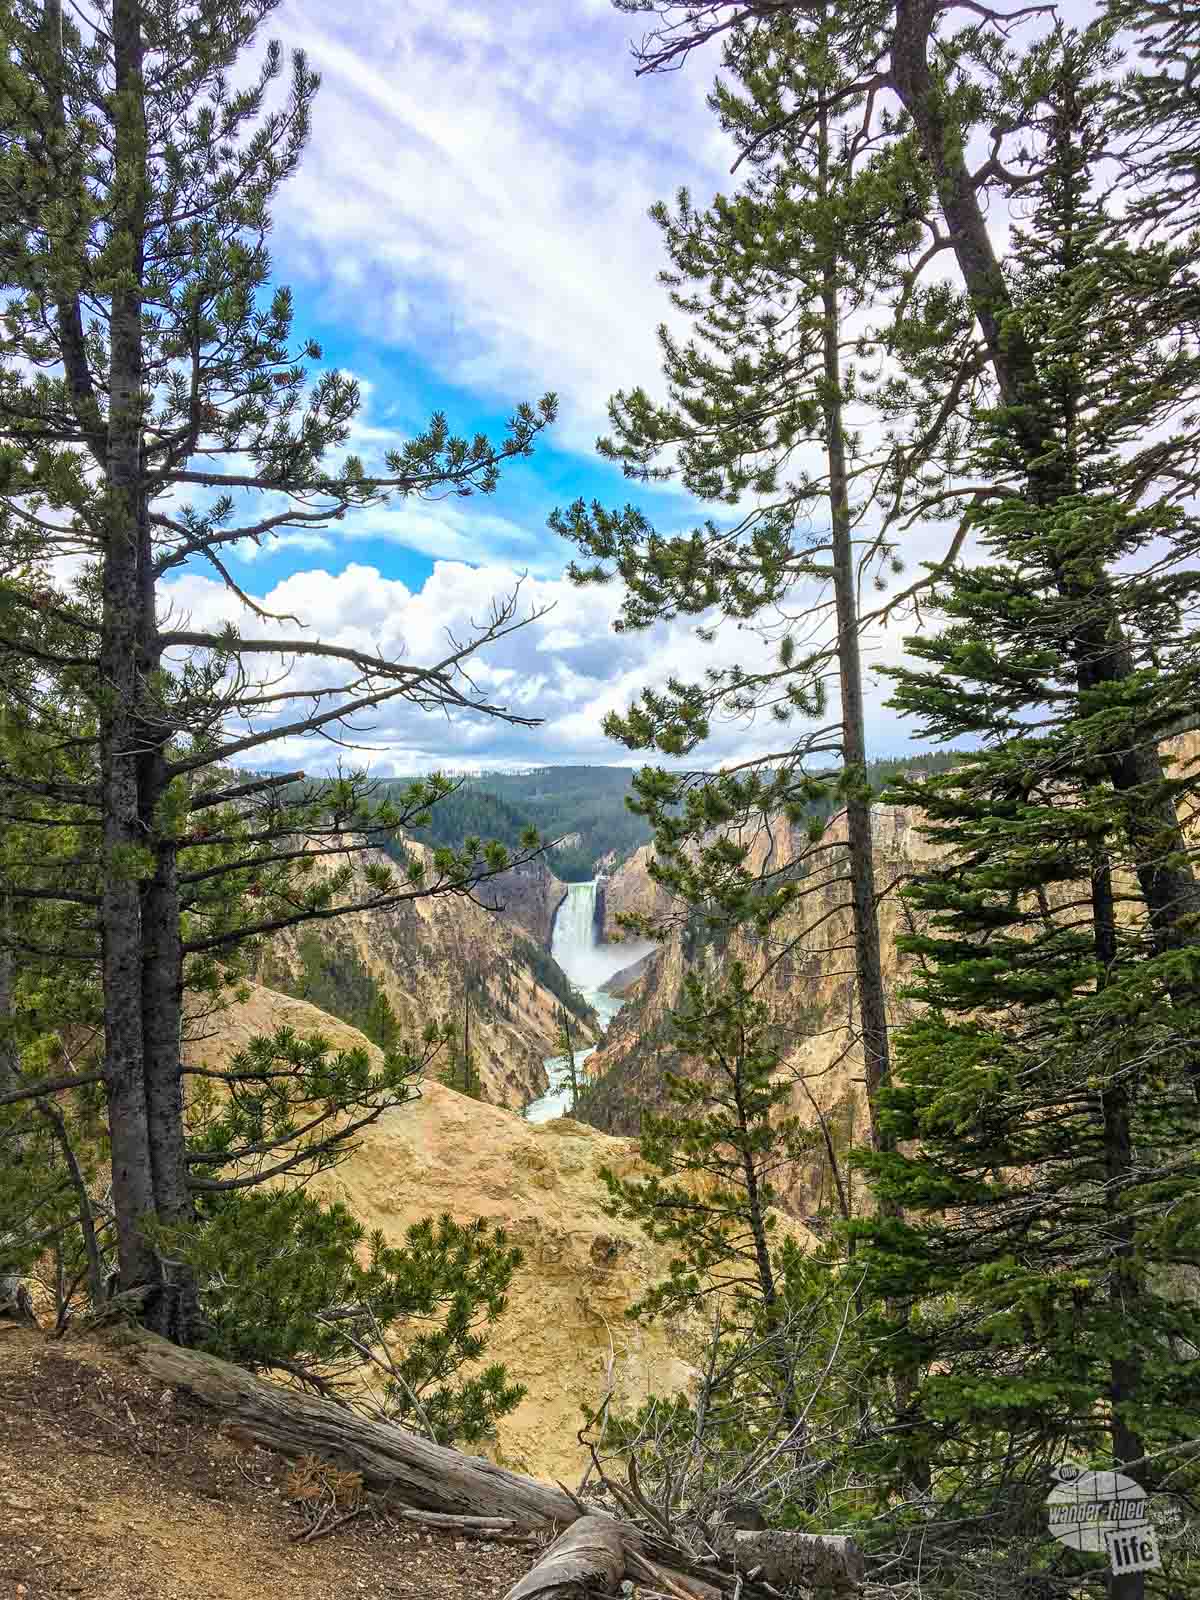 A view of the Lower Falls from Artist Point in Yellowstone National Park